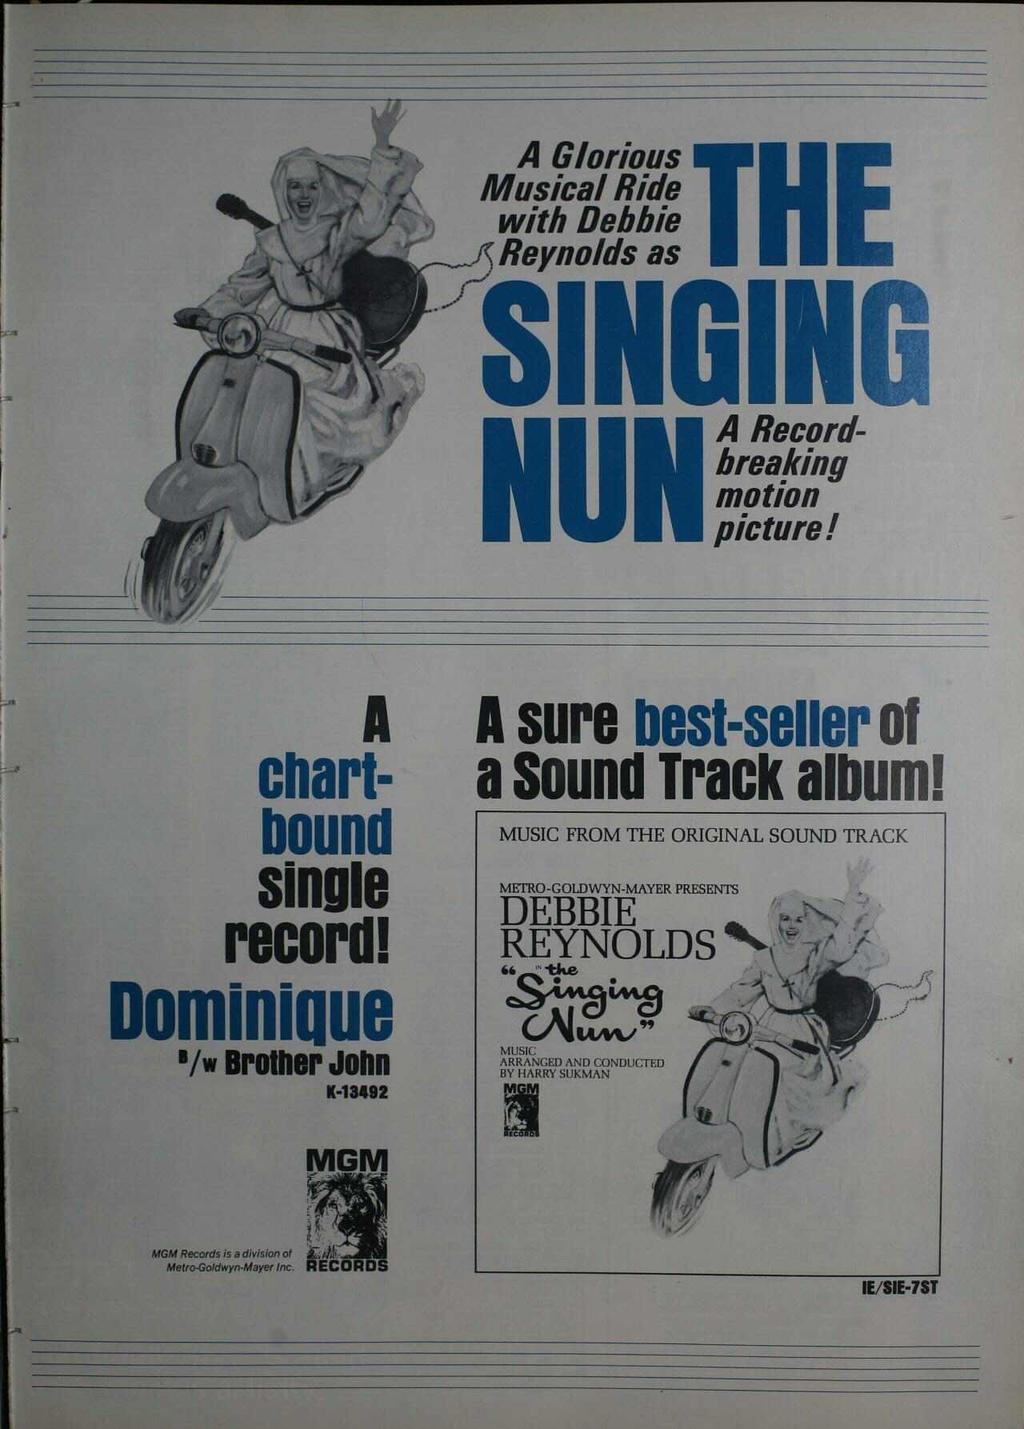 \ 4,. A Glorious Musical Ride with Debbie fç Reynolds as N co A rd breareking motion picture! A chart bound single record! Dominipue '/w Brother John lldi49p A sure best seller of a Sound Track album!